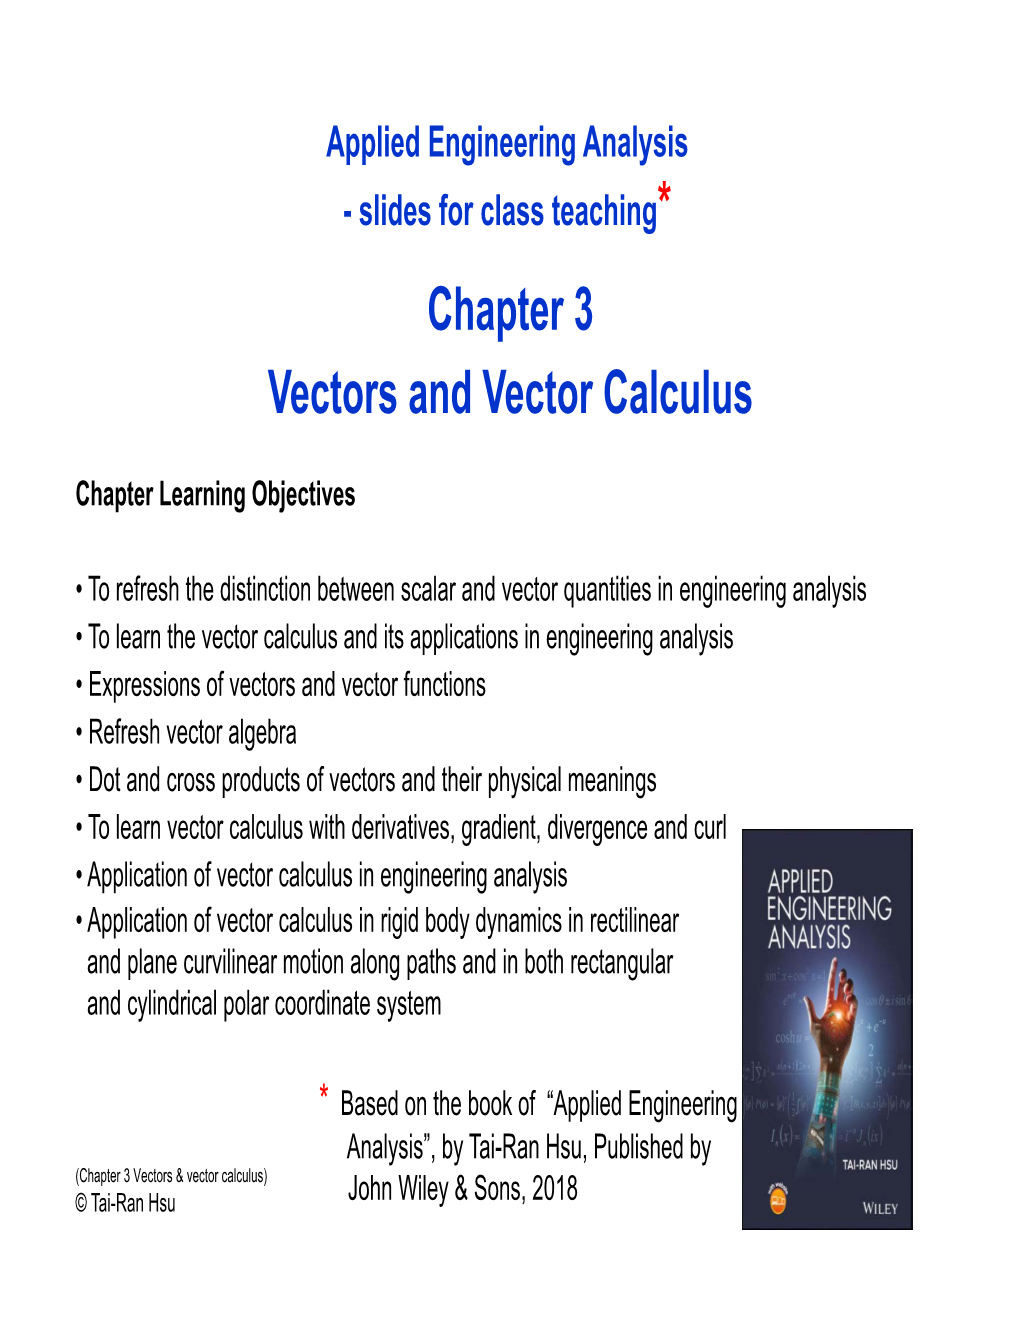 Chapter 3 Vectors and Vector Calculus